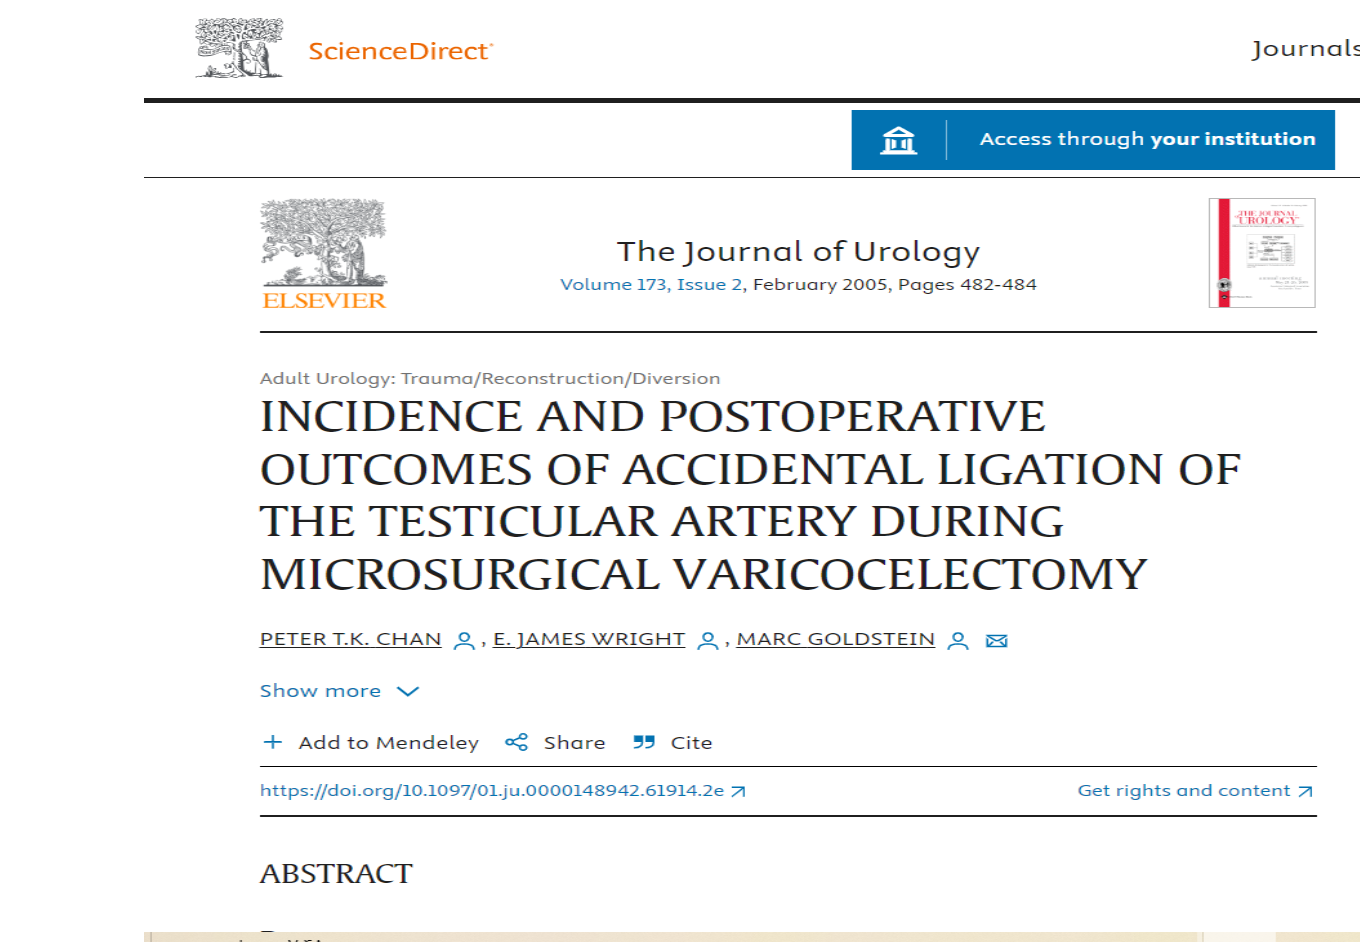 INCIDENCE AND POSTOPERATIVE OUTCOMES OF ACCIDENTAL LIGATION OF THE TESTICULAR ARTERY DURING MICROSURGICAL VARICOCELECTOMY